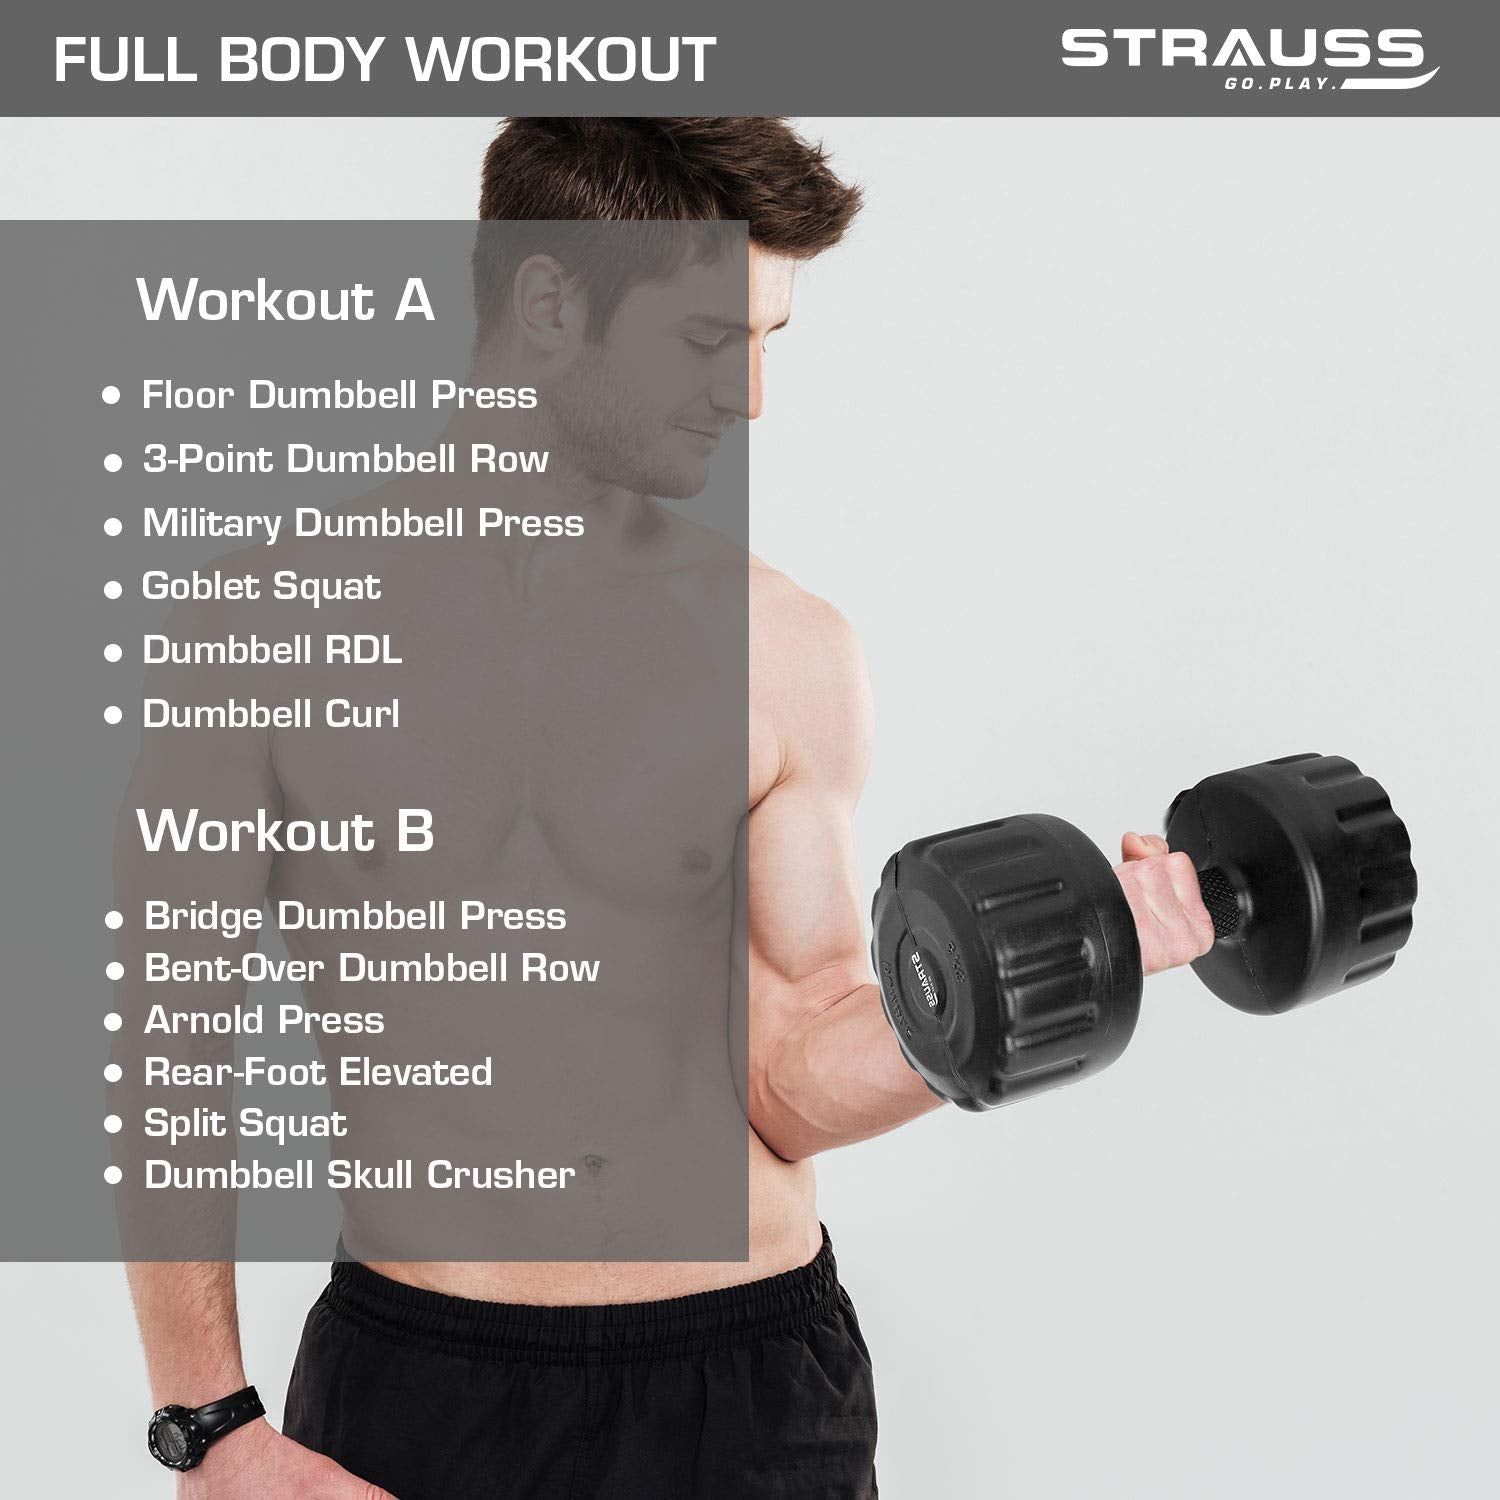 Strauss Unisex PVC Dumbbells Weight for Men & Women | 5Kg (Each)| 10Kg (Pair) | Ideal for Home Workout and Gym Exercises (Black)